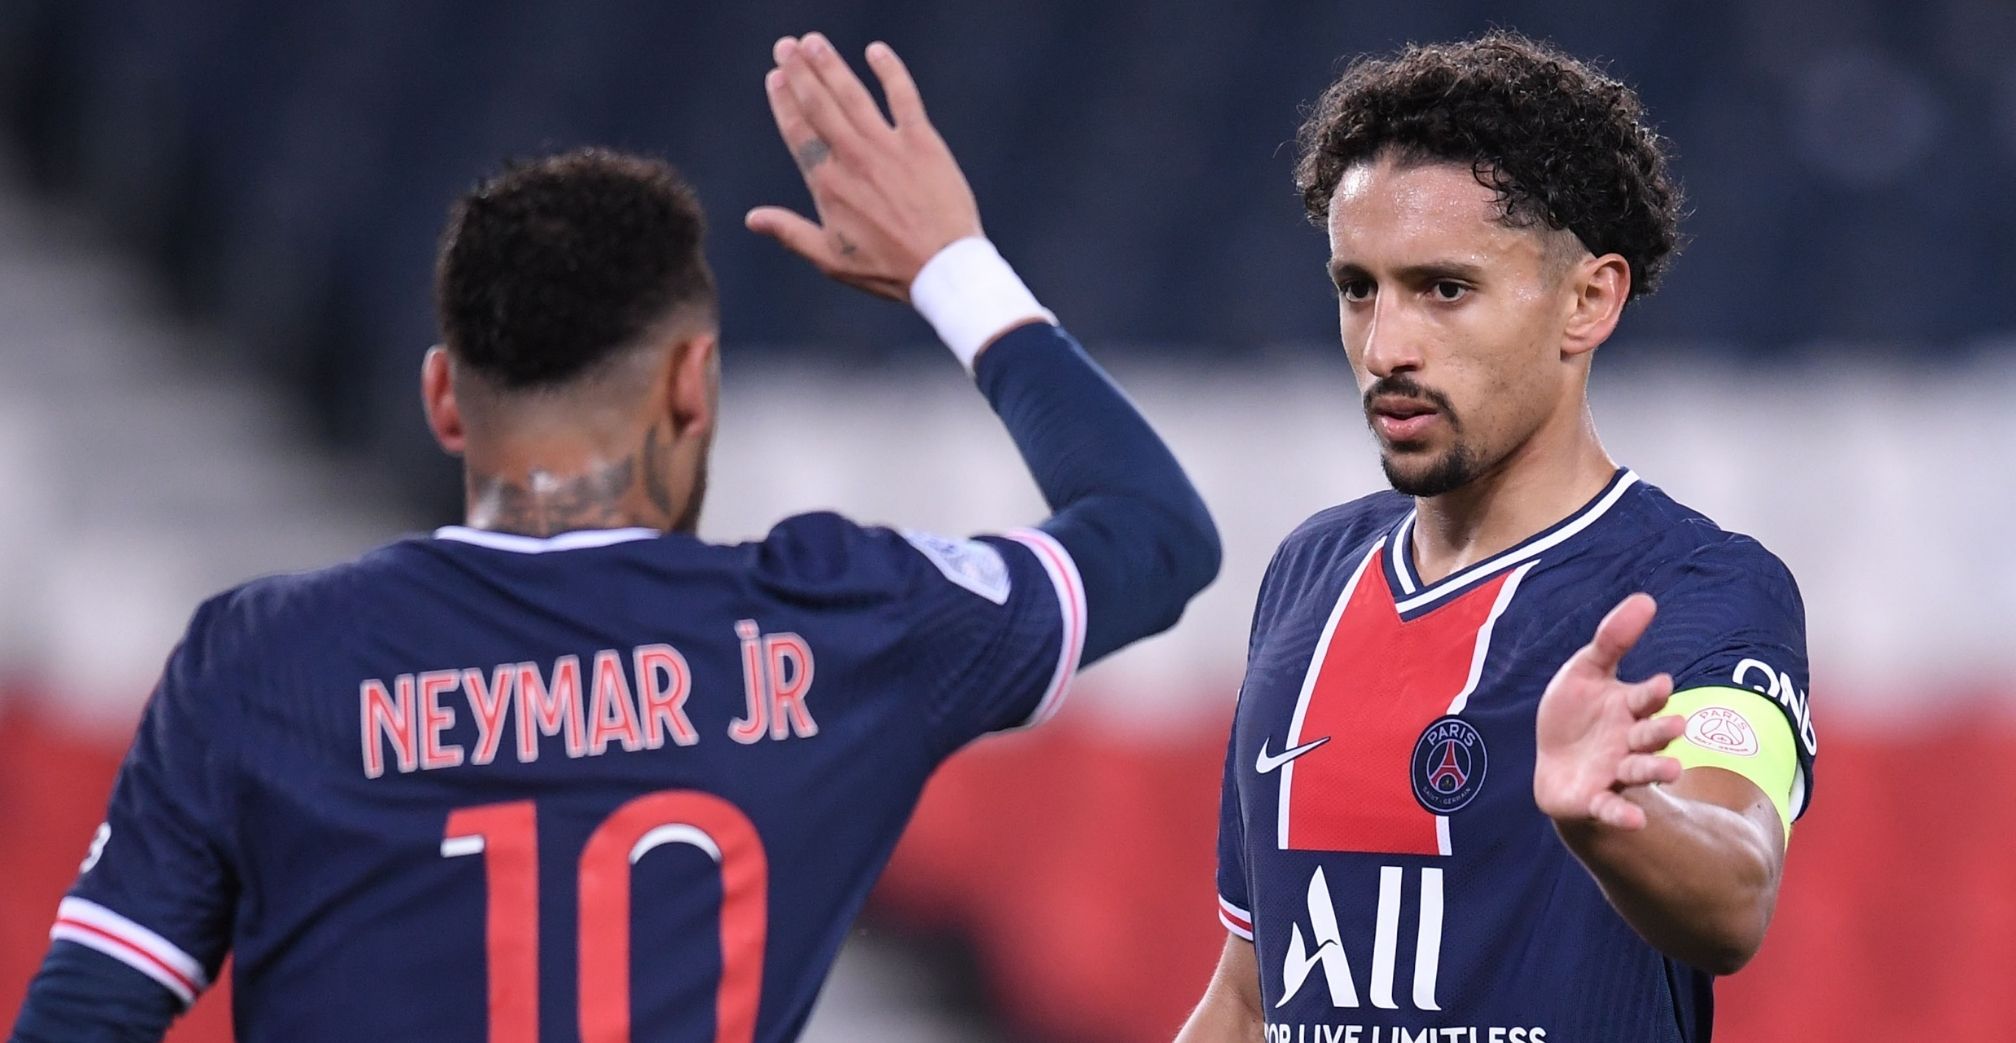 Tuchel: 'Marquinhos is the heart and soul of our team'